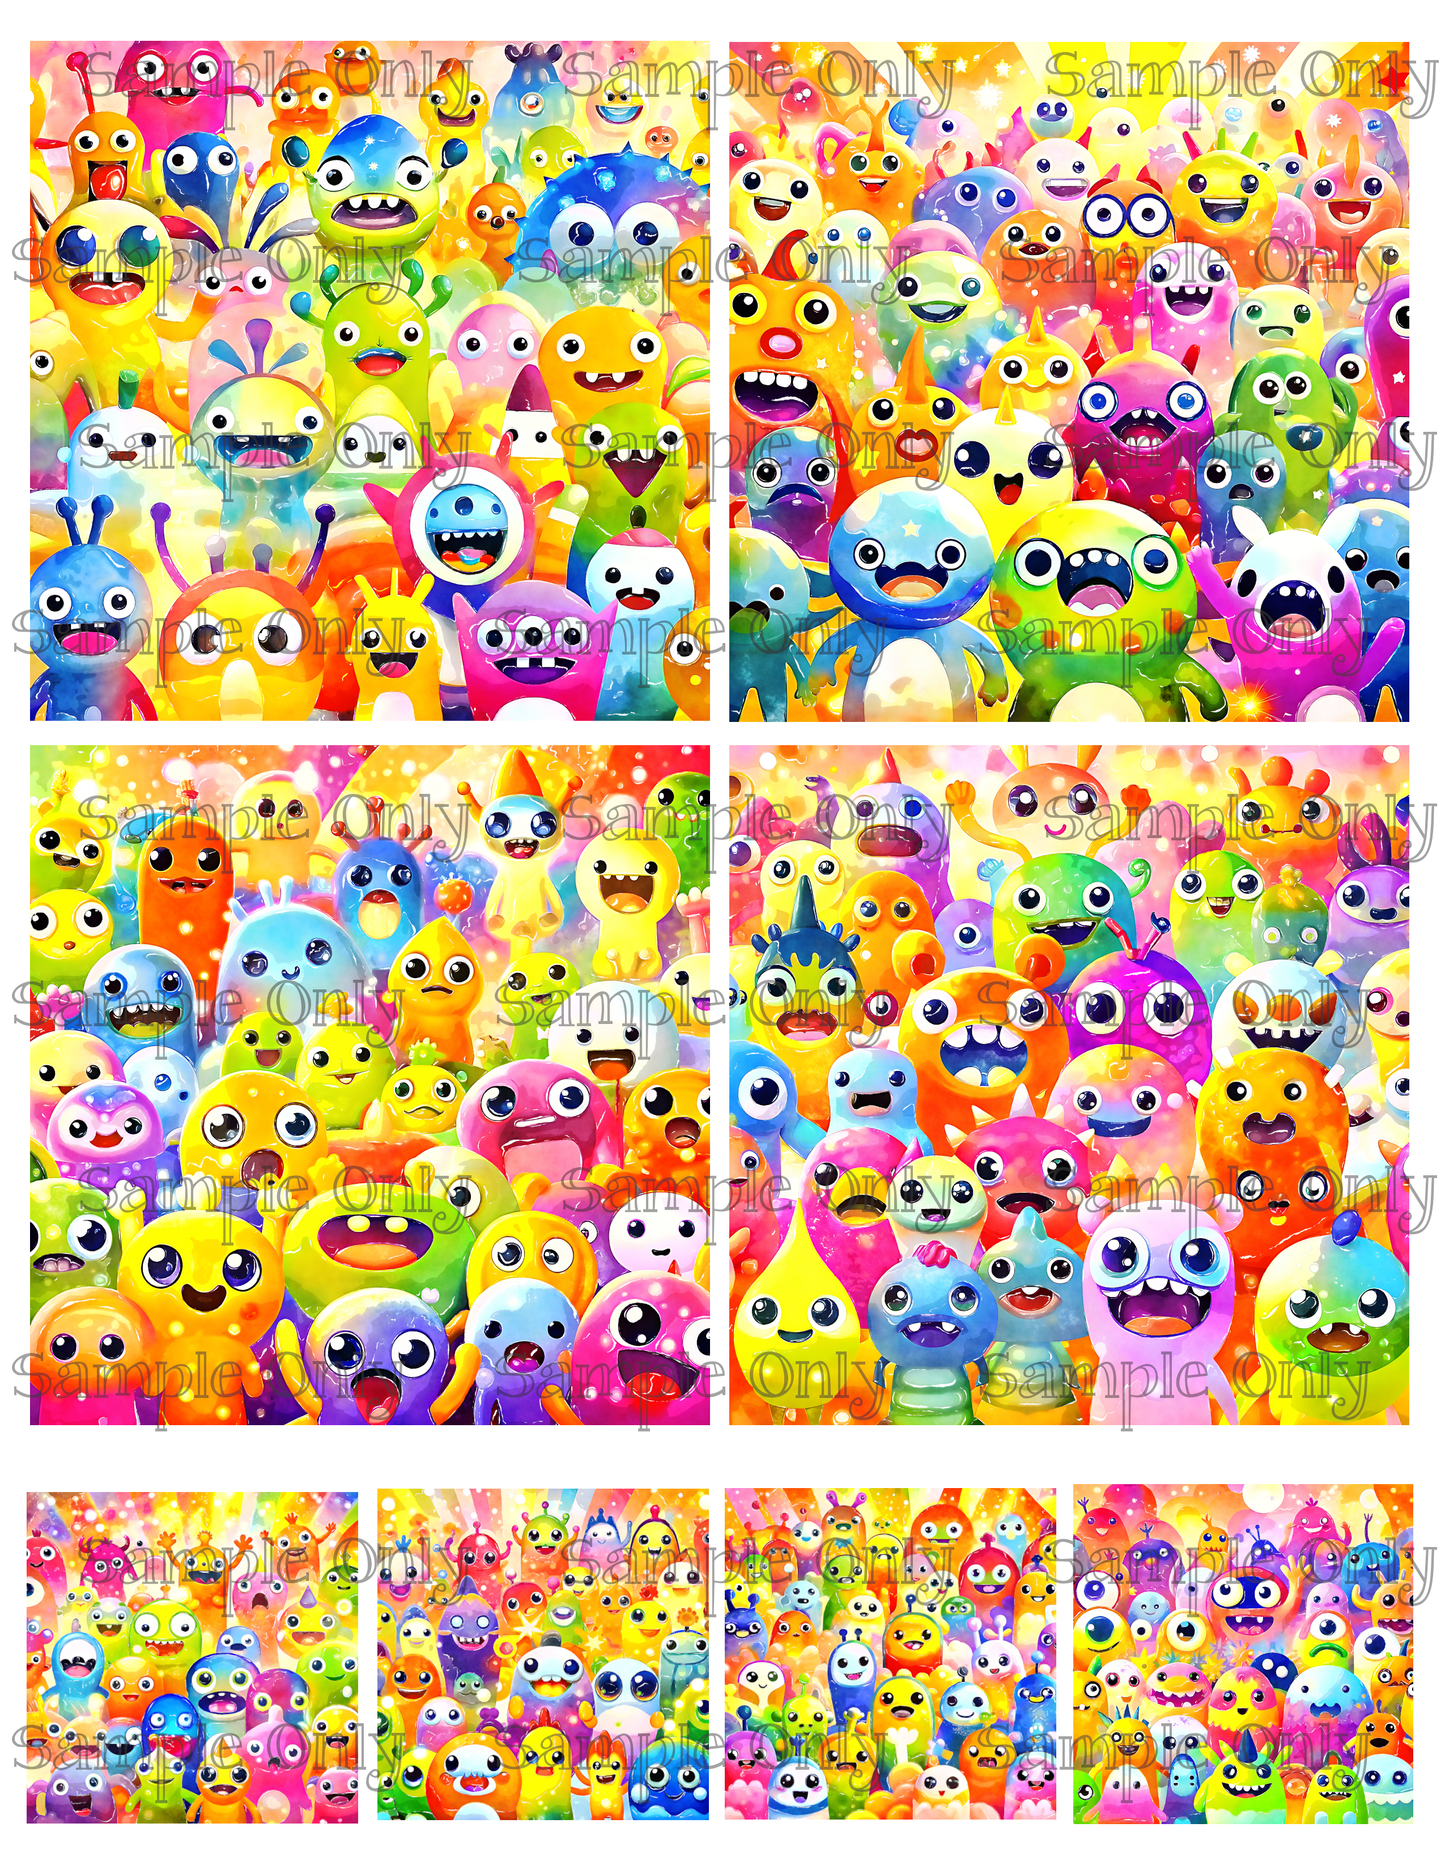 4 Inch Monster Crowd Image Sheet For Polymer Clay Transfer Decal DIGITAL FILE OR PRINTED